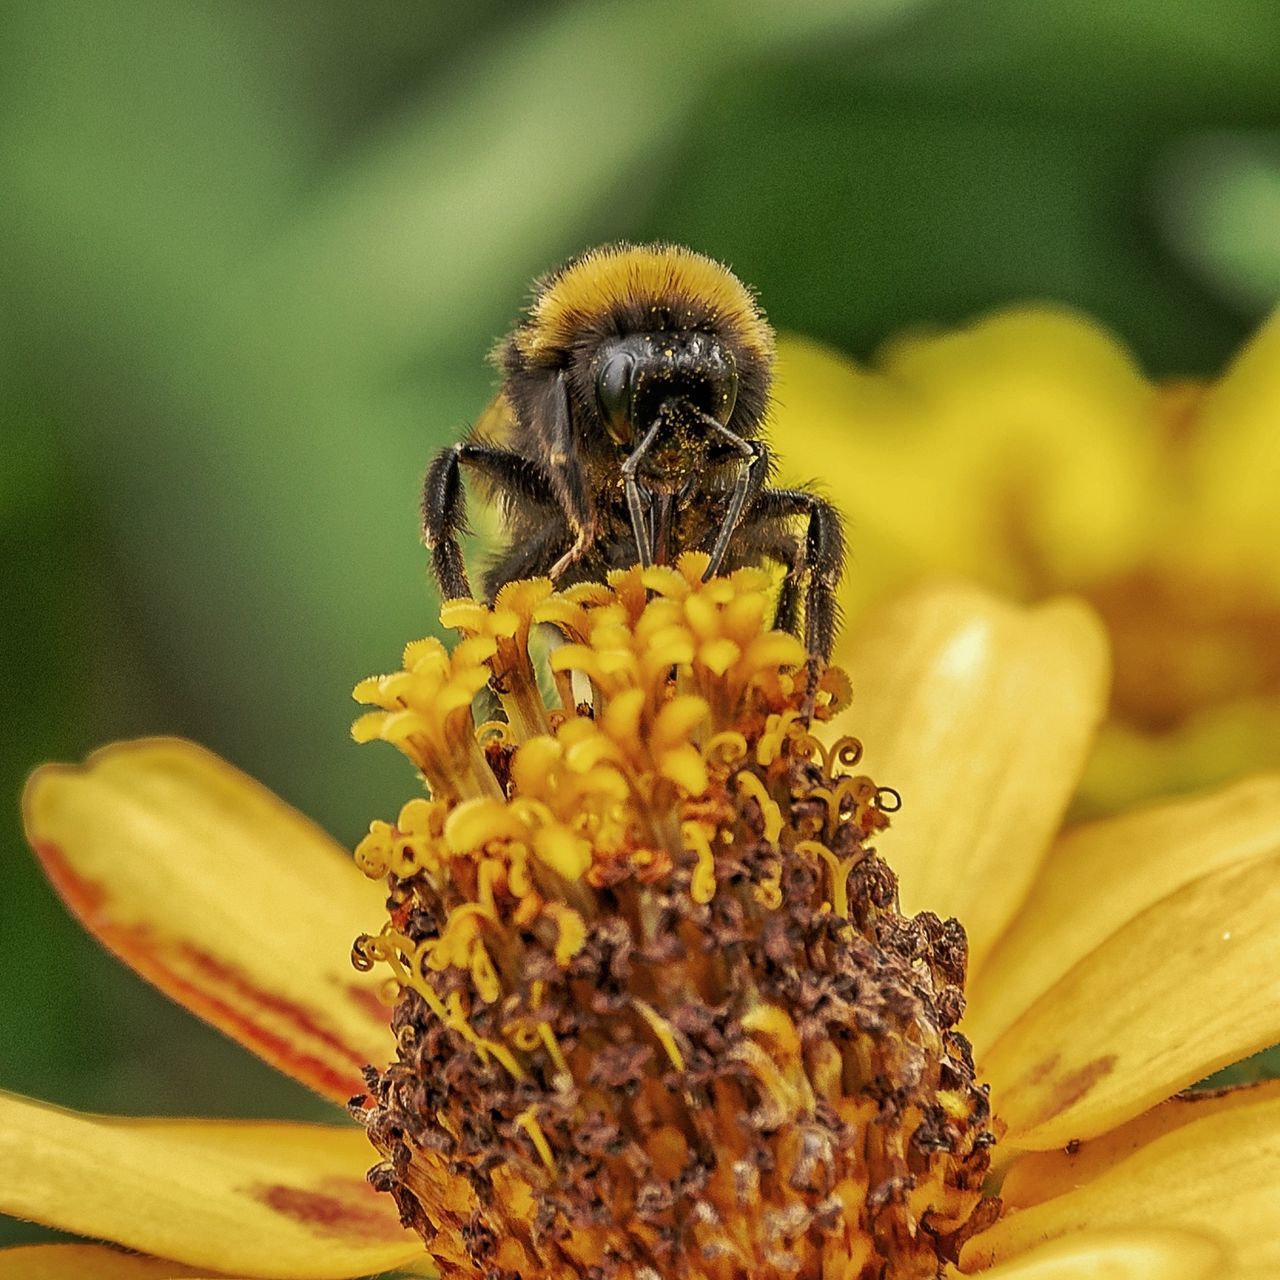 flower, flowering plant, invertebrate, fragility, vulnerability, animal themes, bee, animals in the wild, insect, animal wildlife, one animal, animal, flower head, freshness, petal, beauty in nature, close-up, yellow, pollination, inflorescence, no people, honey bee, pollen, bumblebee